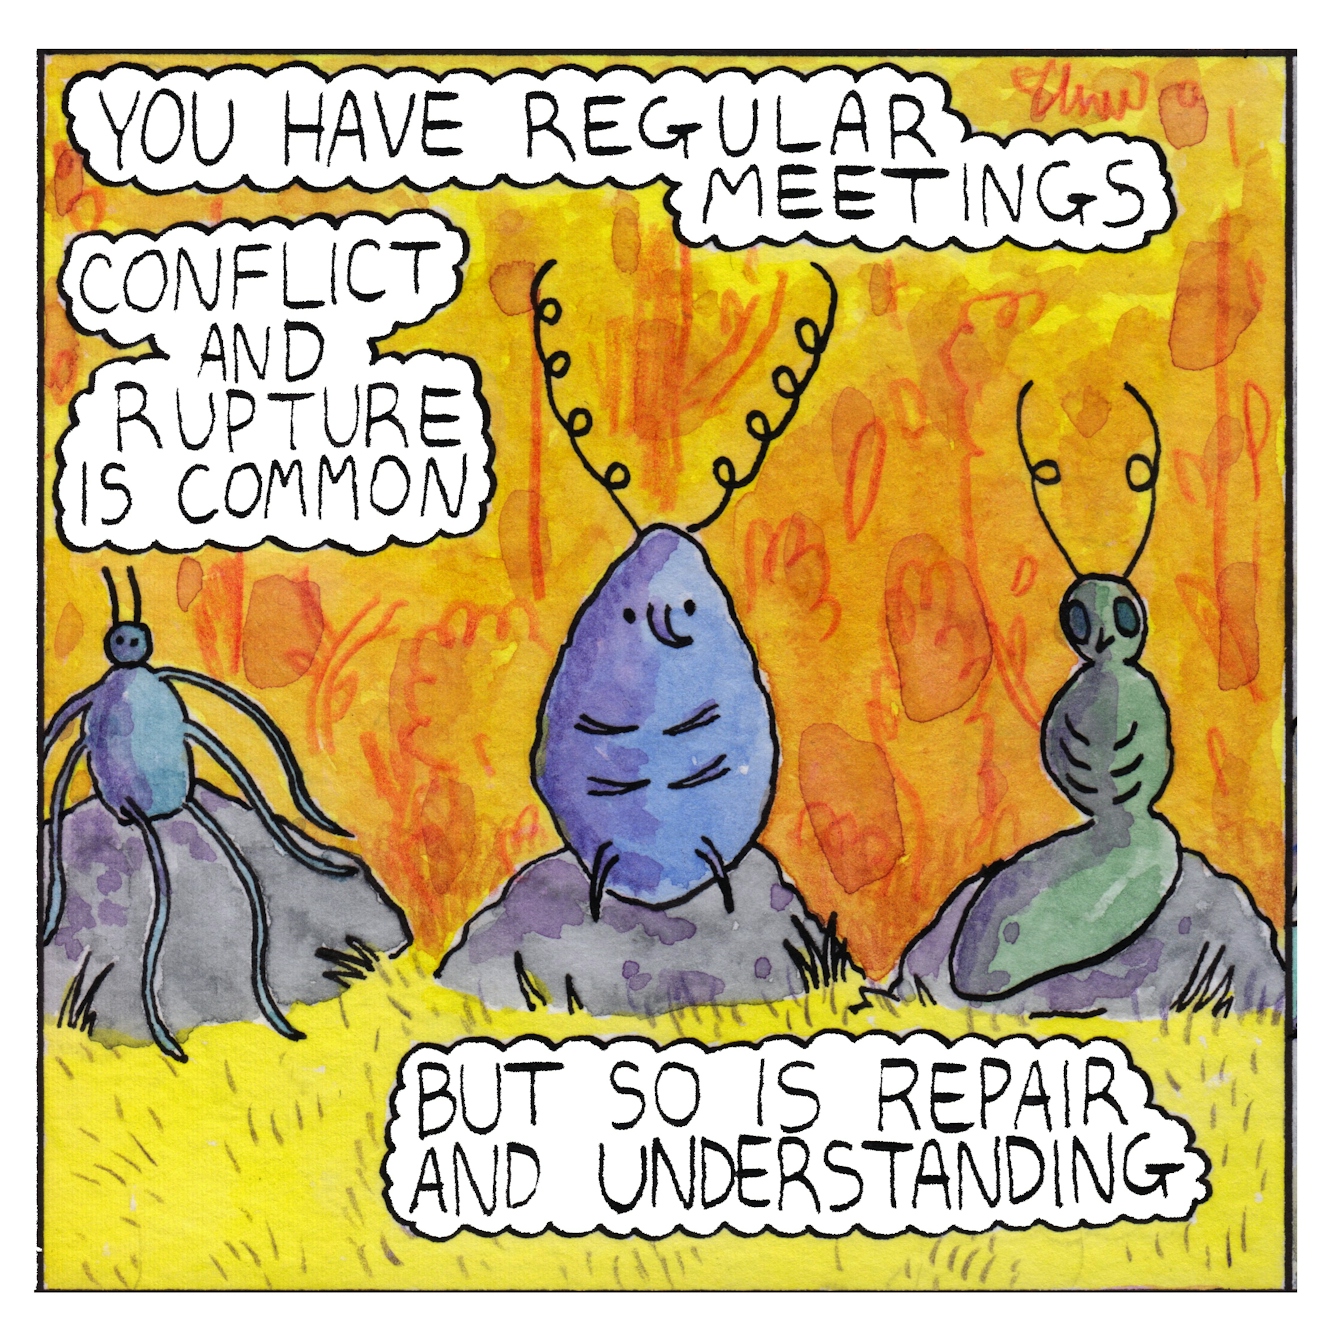 Panel 3 of a six-panel comic made with ink, watercolour and colour pencils: Three differnt species of insect sit on small rocks on the edge of a yellow lawn, having a meeting. Three text bubbles around them read: “You have regular meetings. Conflict and rupture is common. But so is repair and understanding”